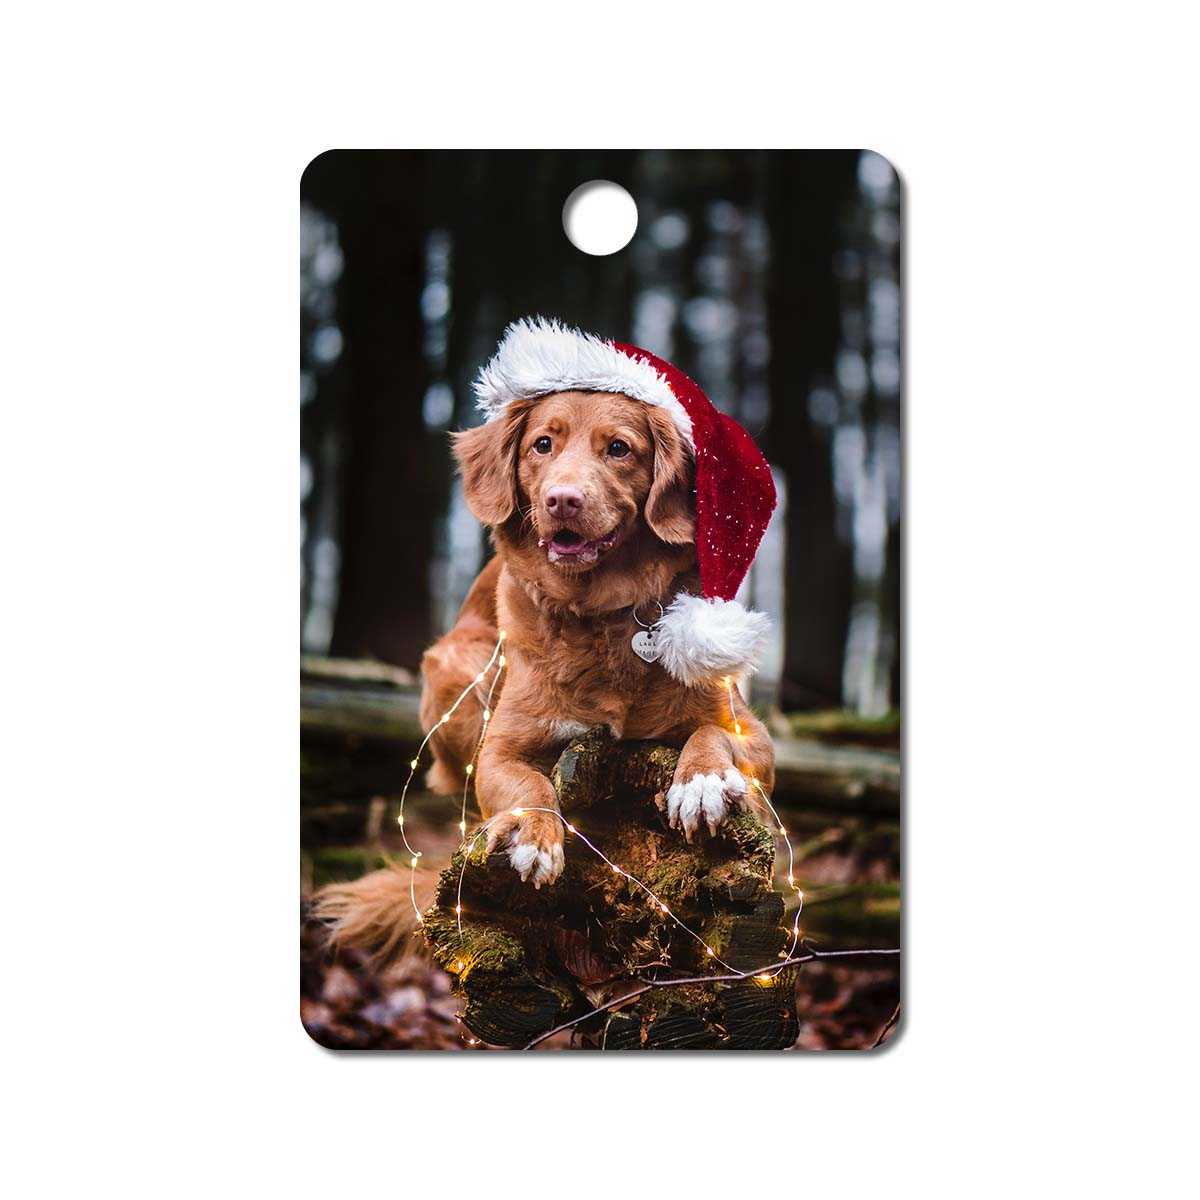 Metal ornament with an image of a dog wearing a santa claus hat